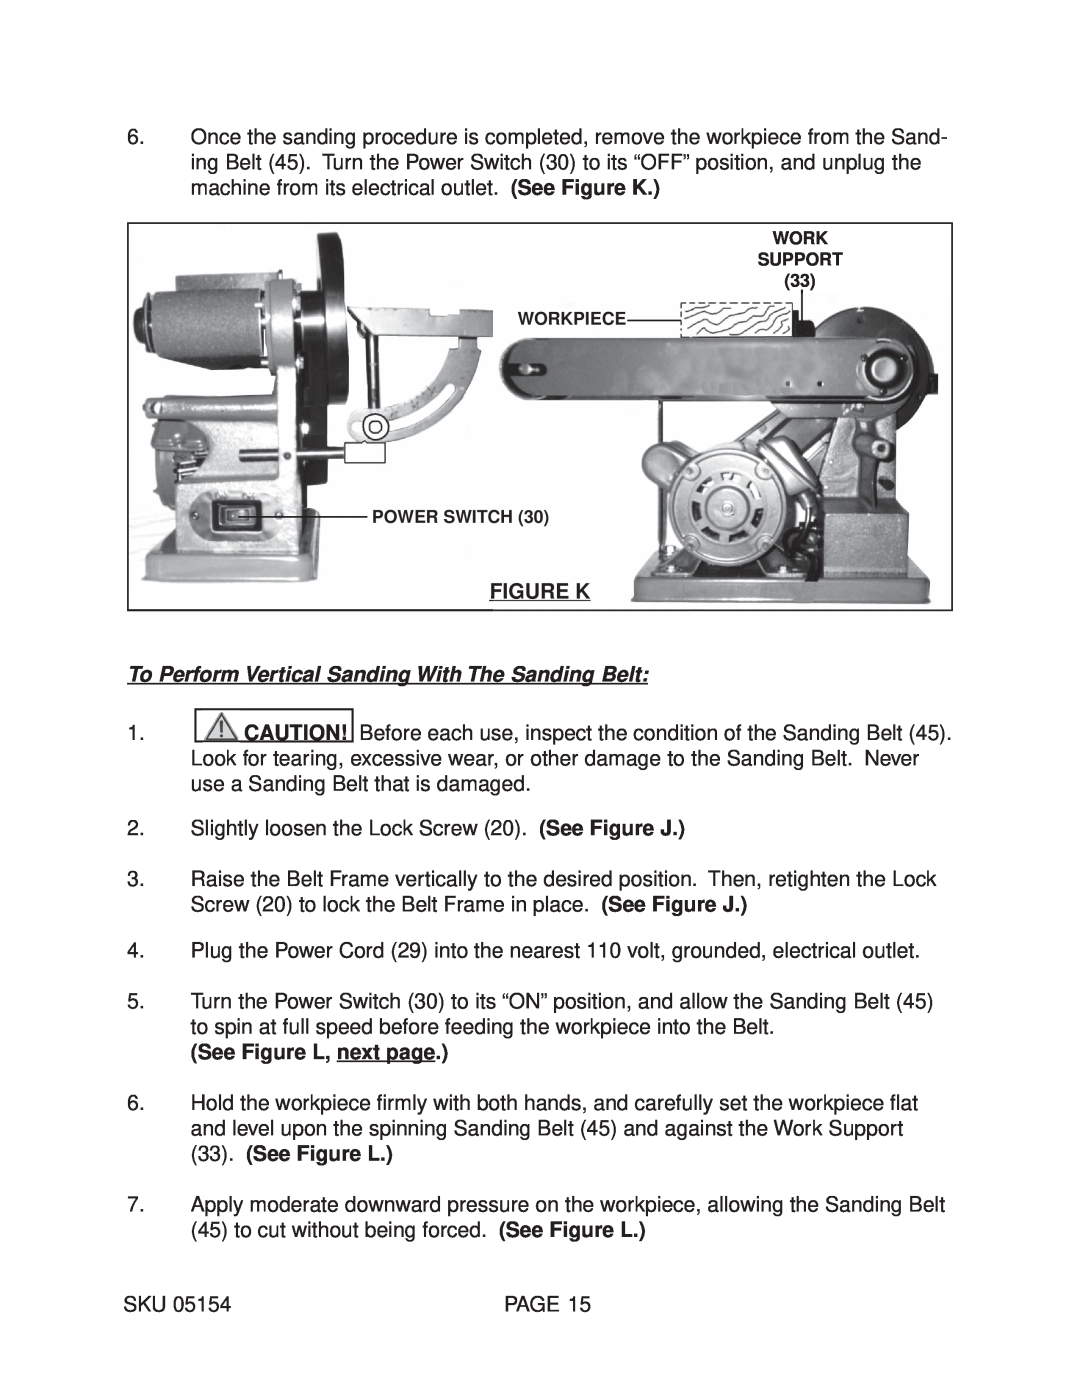 Harbor Freight Tools 05154 Figure K, To Perform Vertical Sanding With The Sanding Belt, See Figure L, next page 